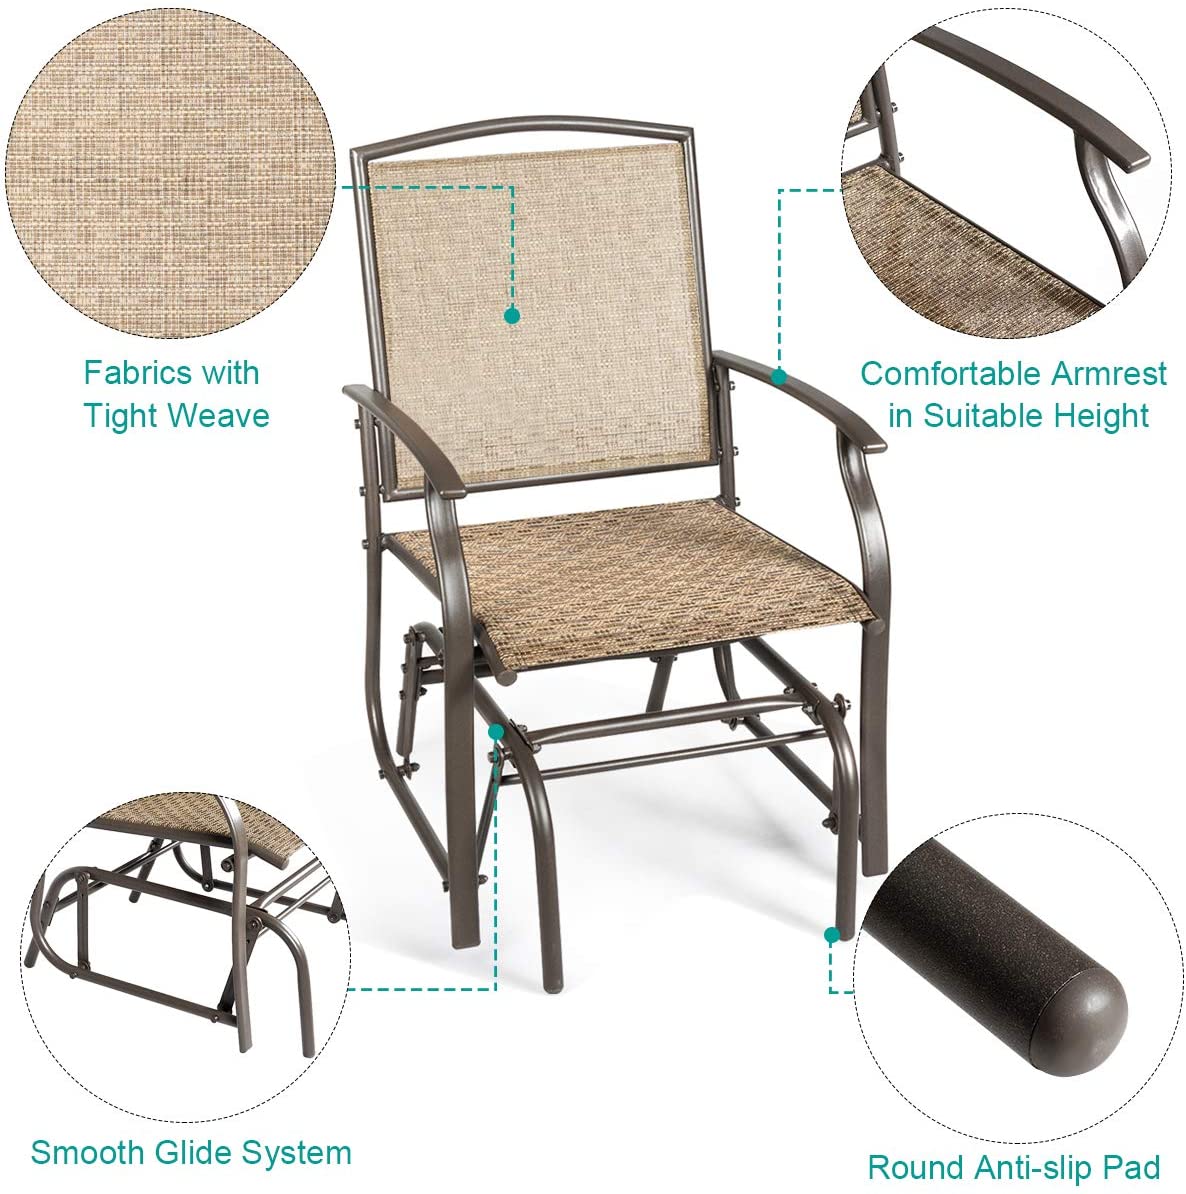 Outdoor Glider Chair W/Sturdy Metal Frame & Breathable Mesh Fabric, Porch Lounge Swing Rocking Chair for Lawn, Garden, Porch, Backyard, Poolside, Patio Glider - image 4 of 9